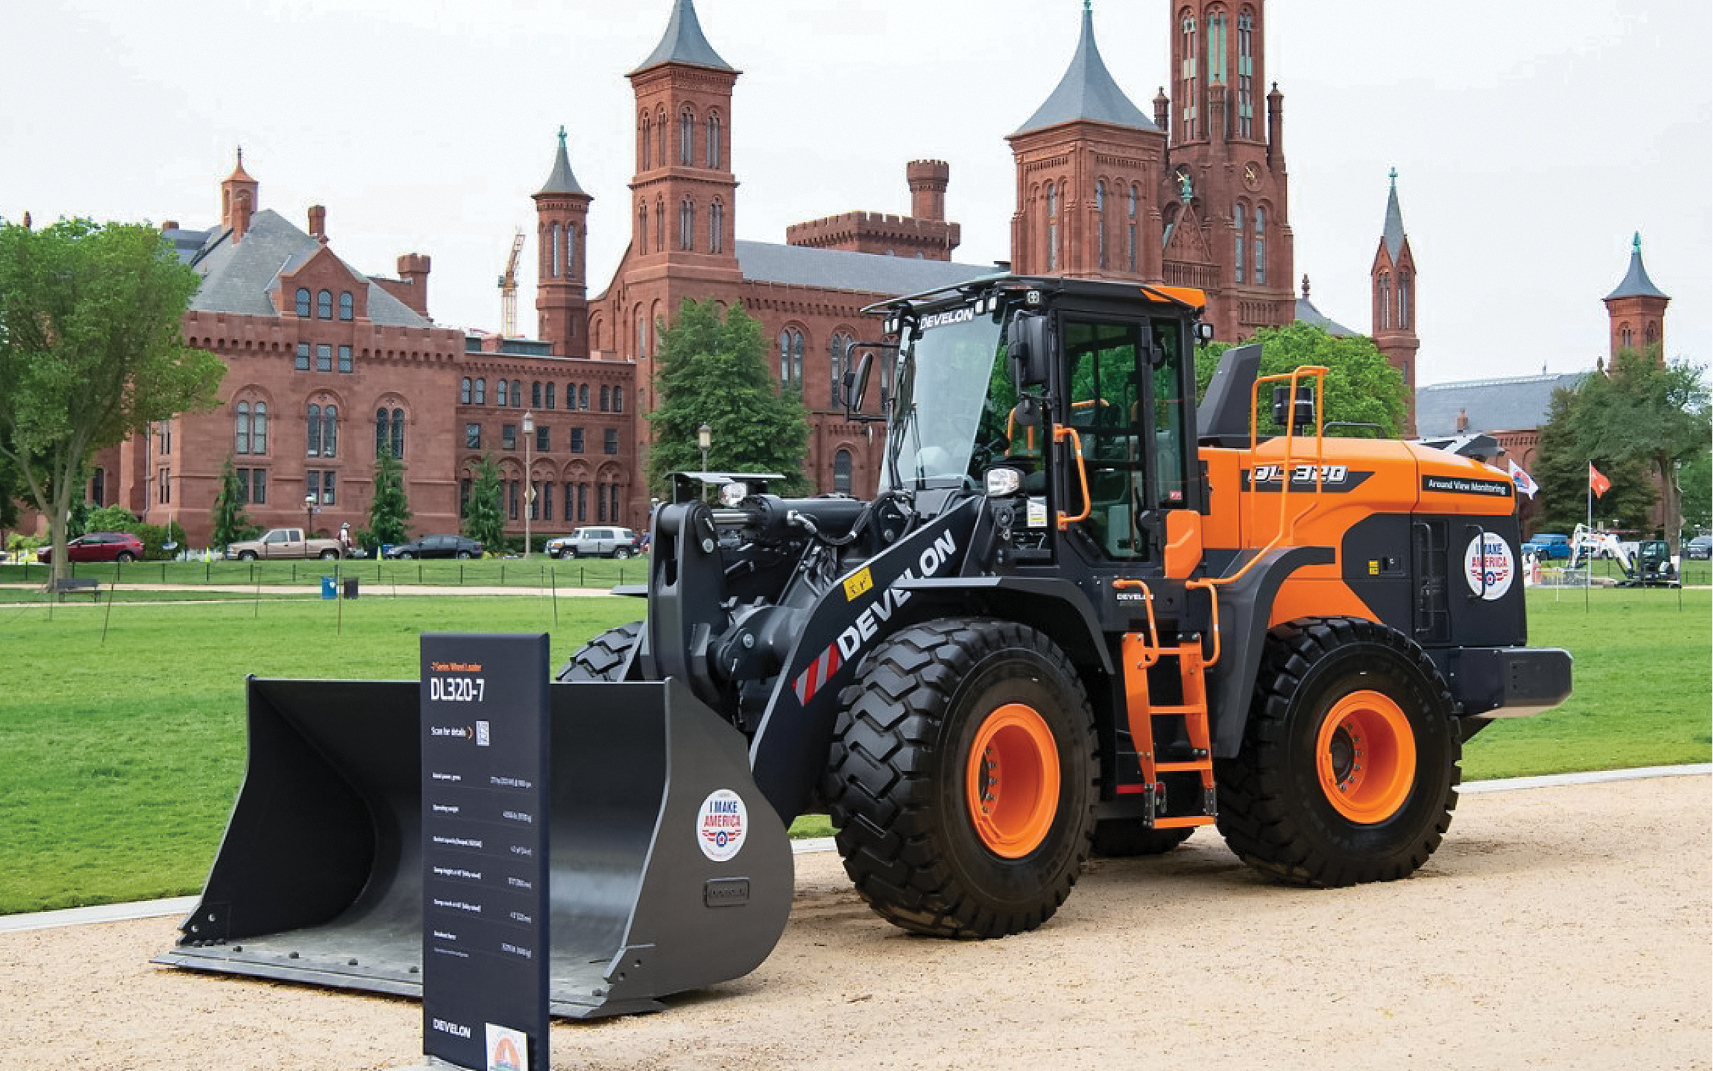 A DEVELON DL320-7 wheel loader on display on the National Mall in Washington, D.C. 